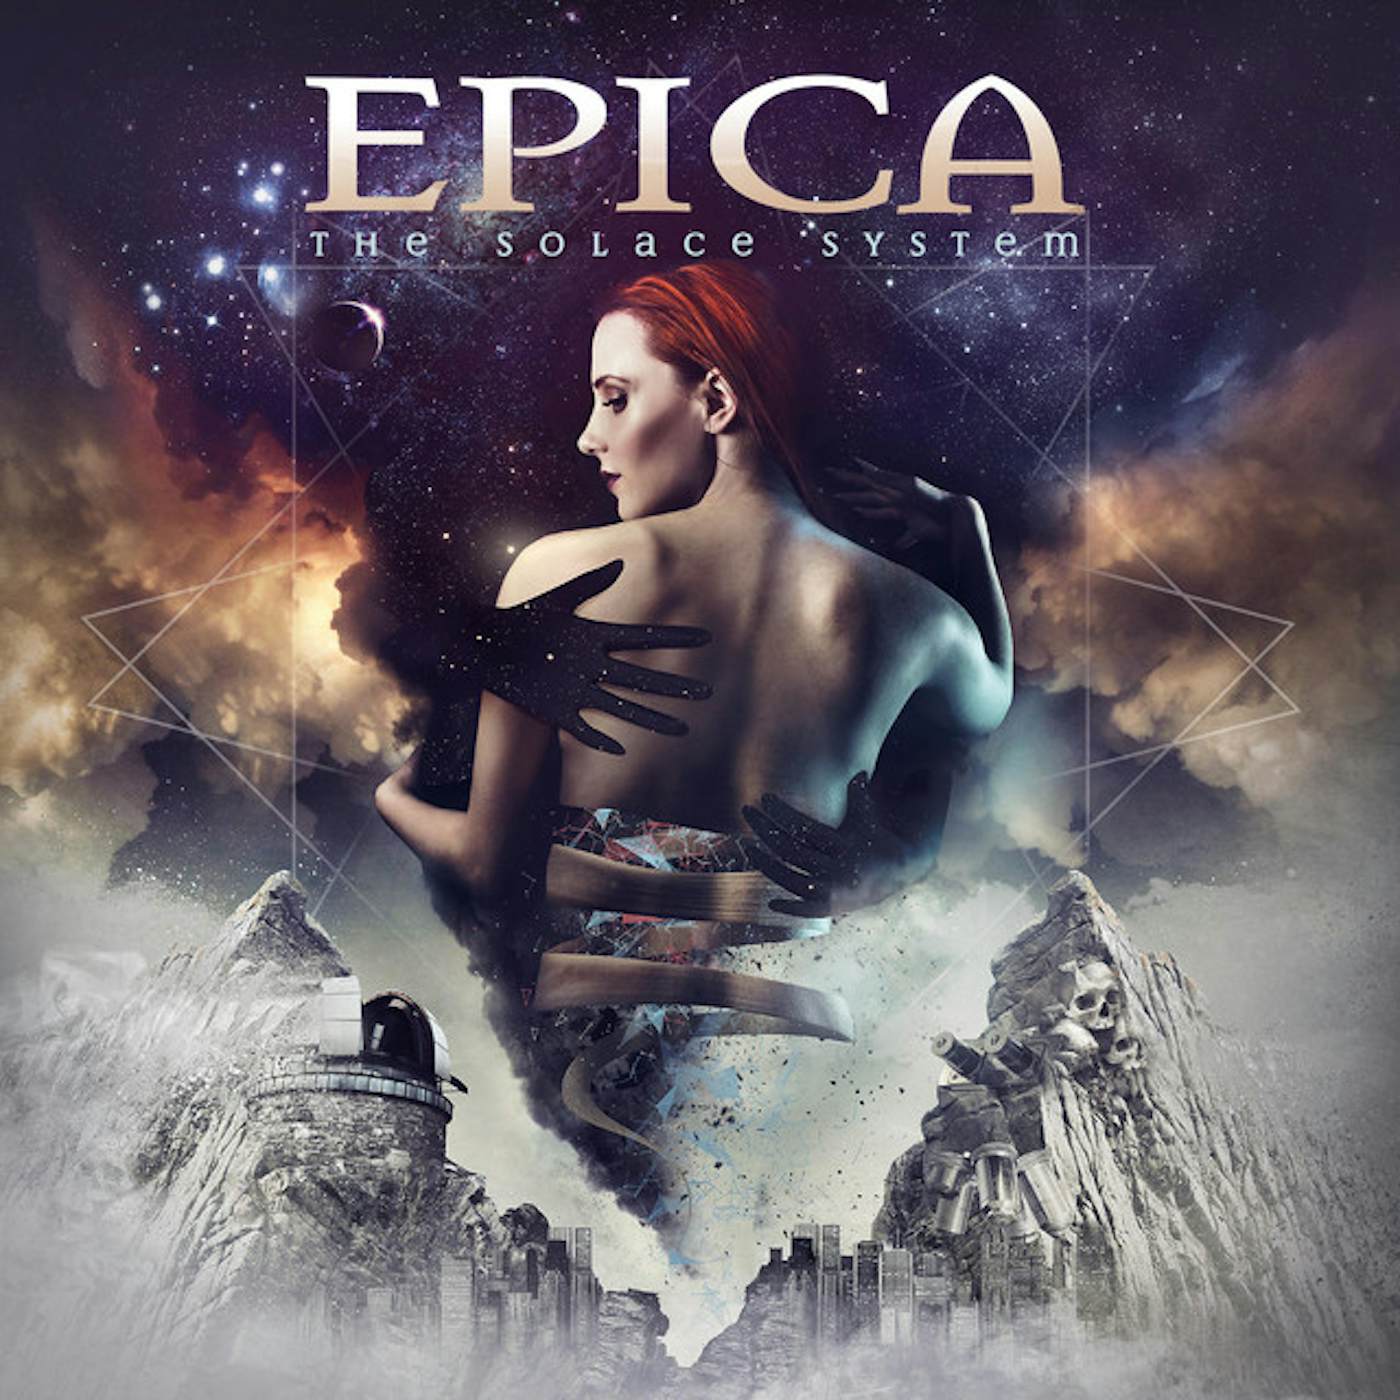 Epica SOLACE SYSTEM Vinyl Record